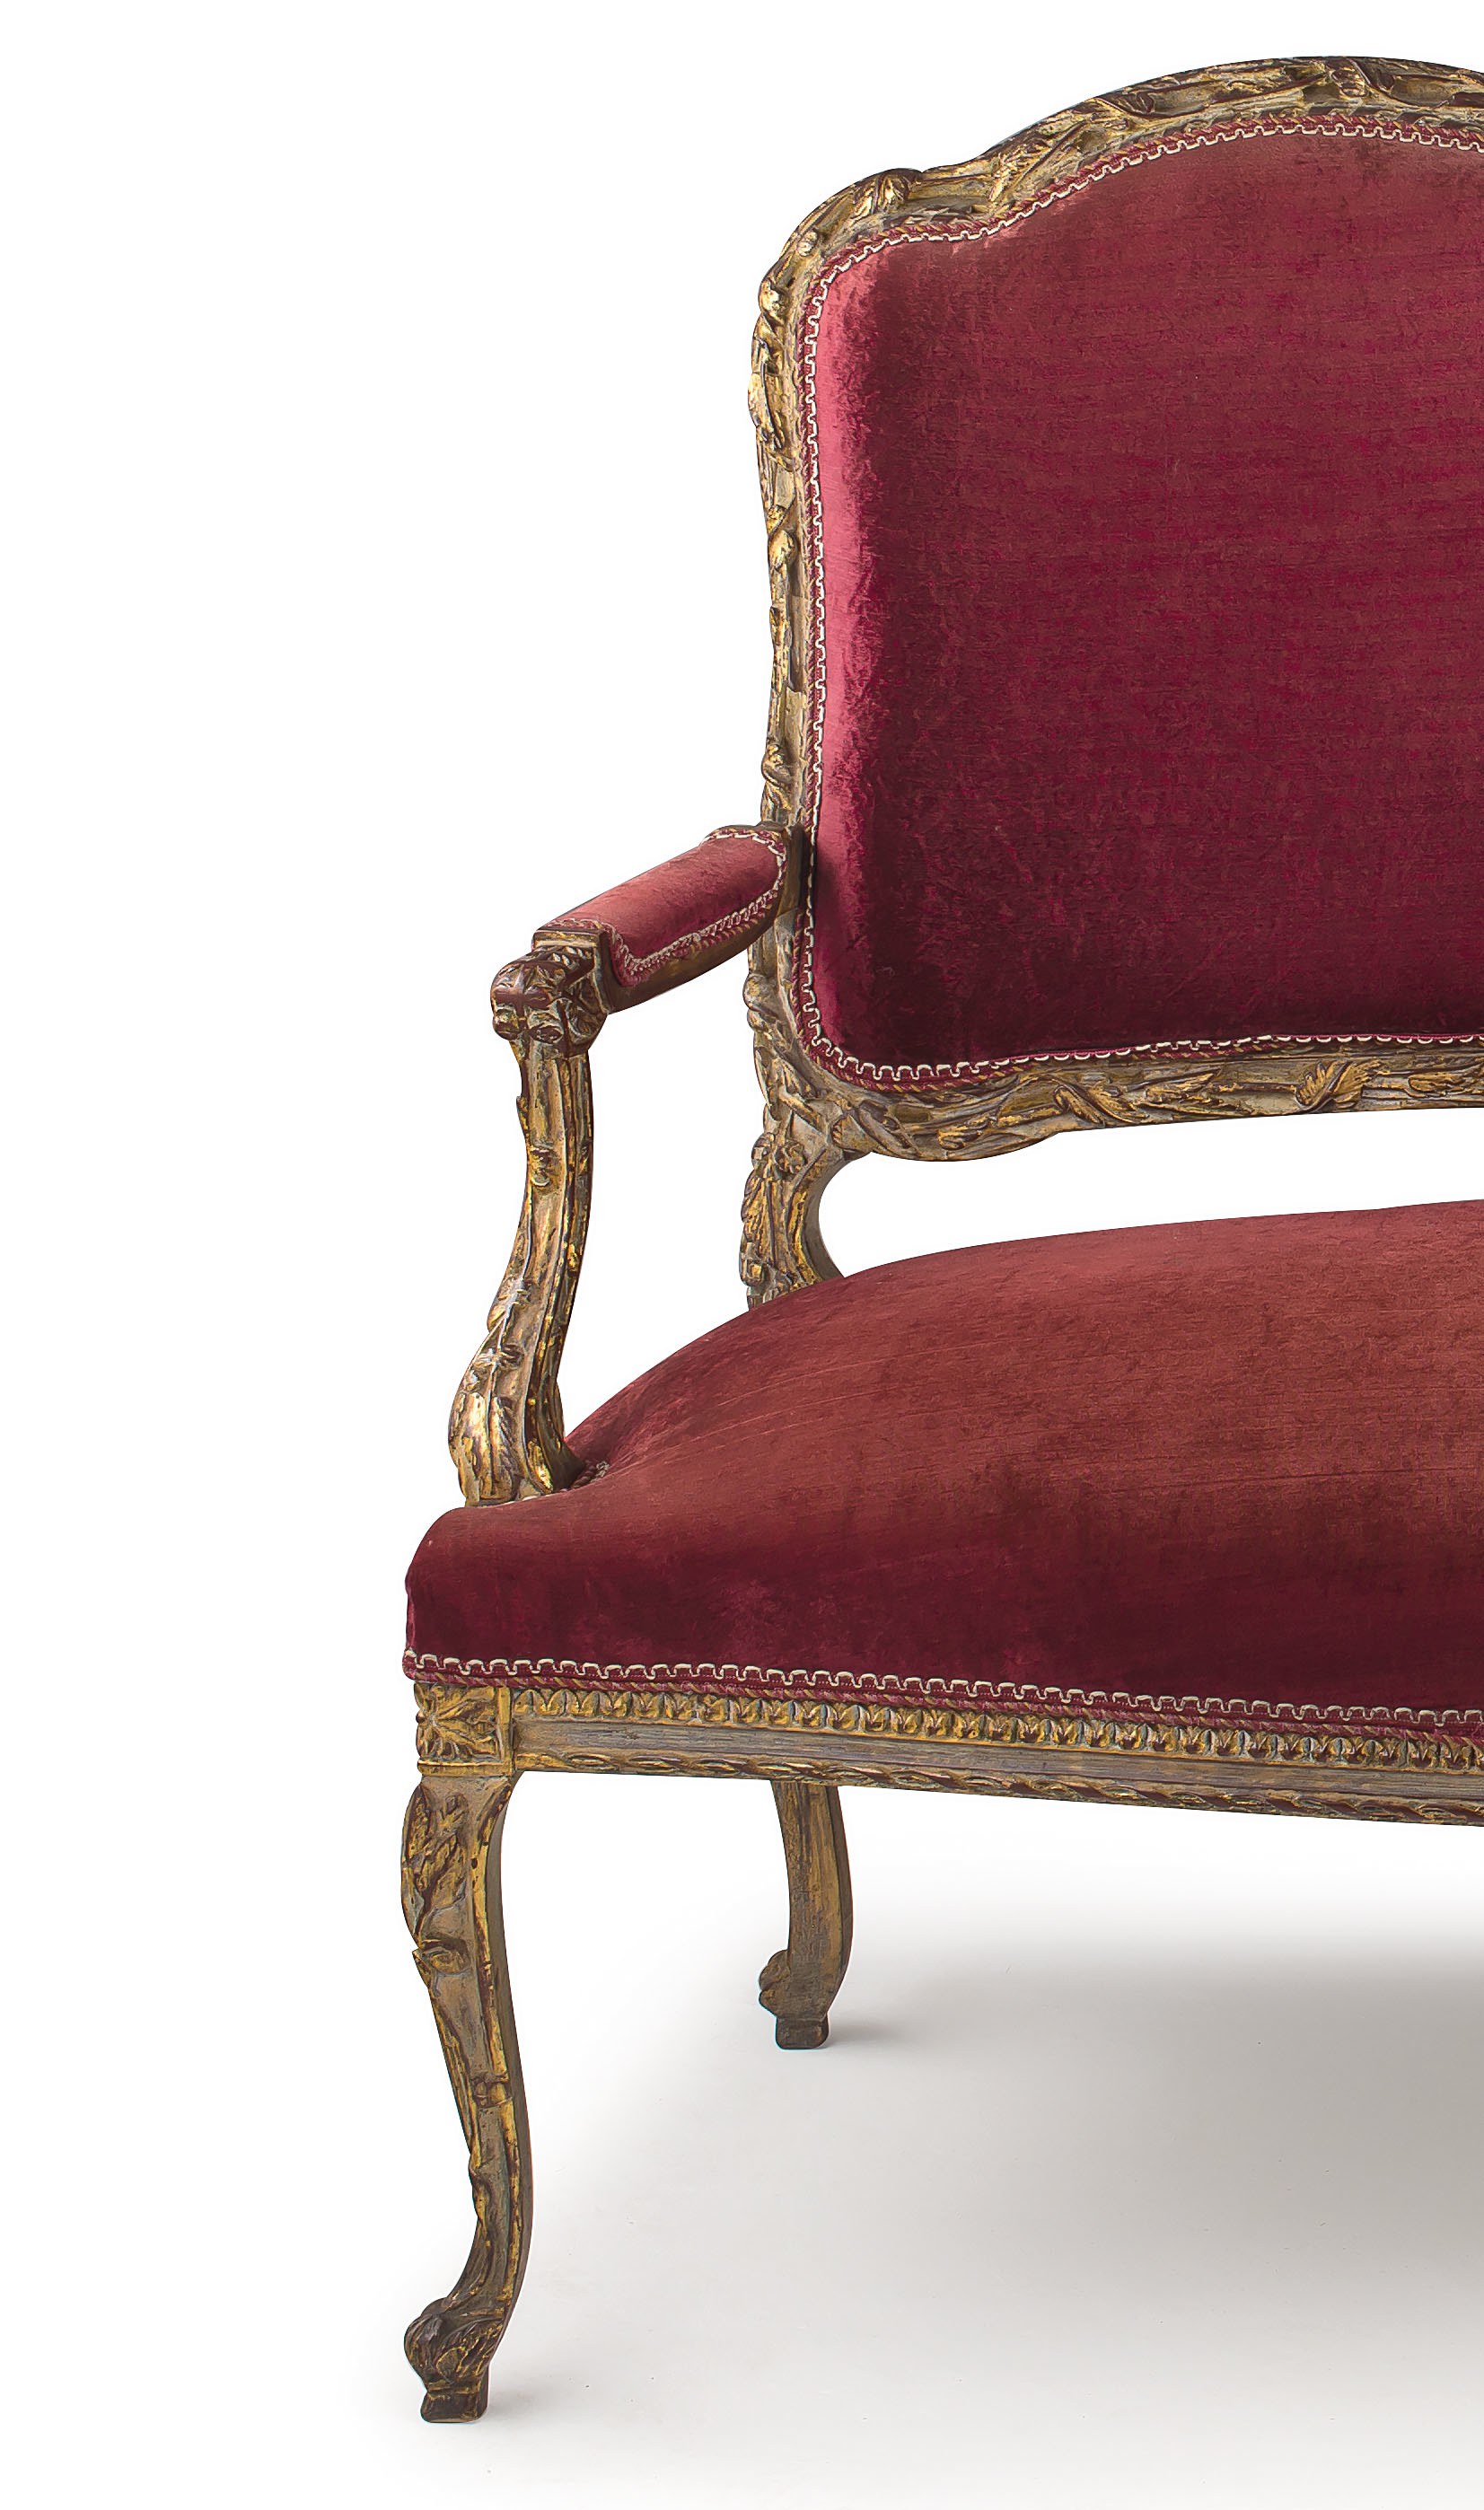 A Louis XVI style gilded and upholstered settee